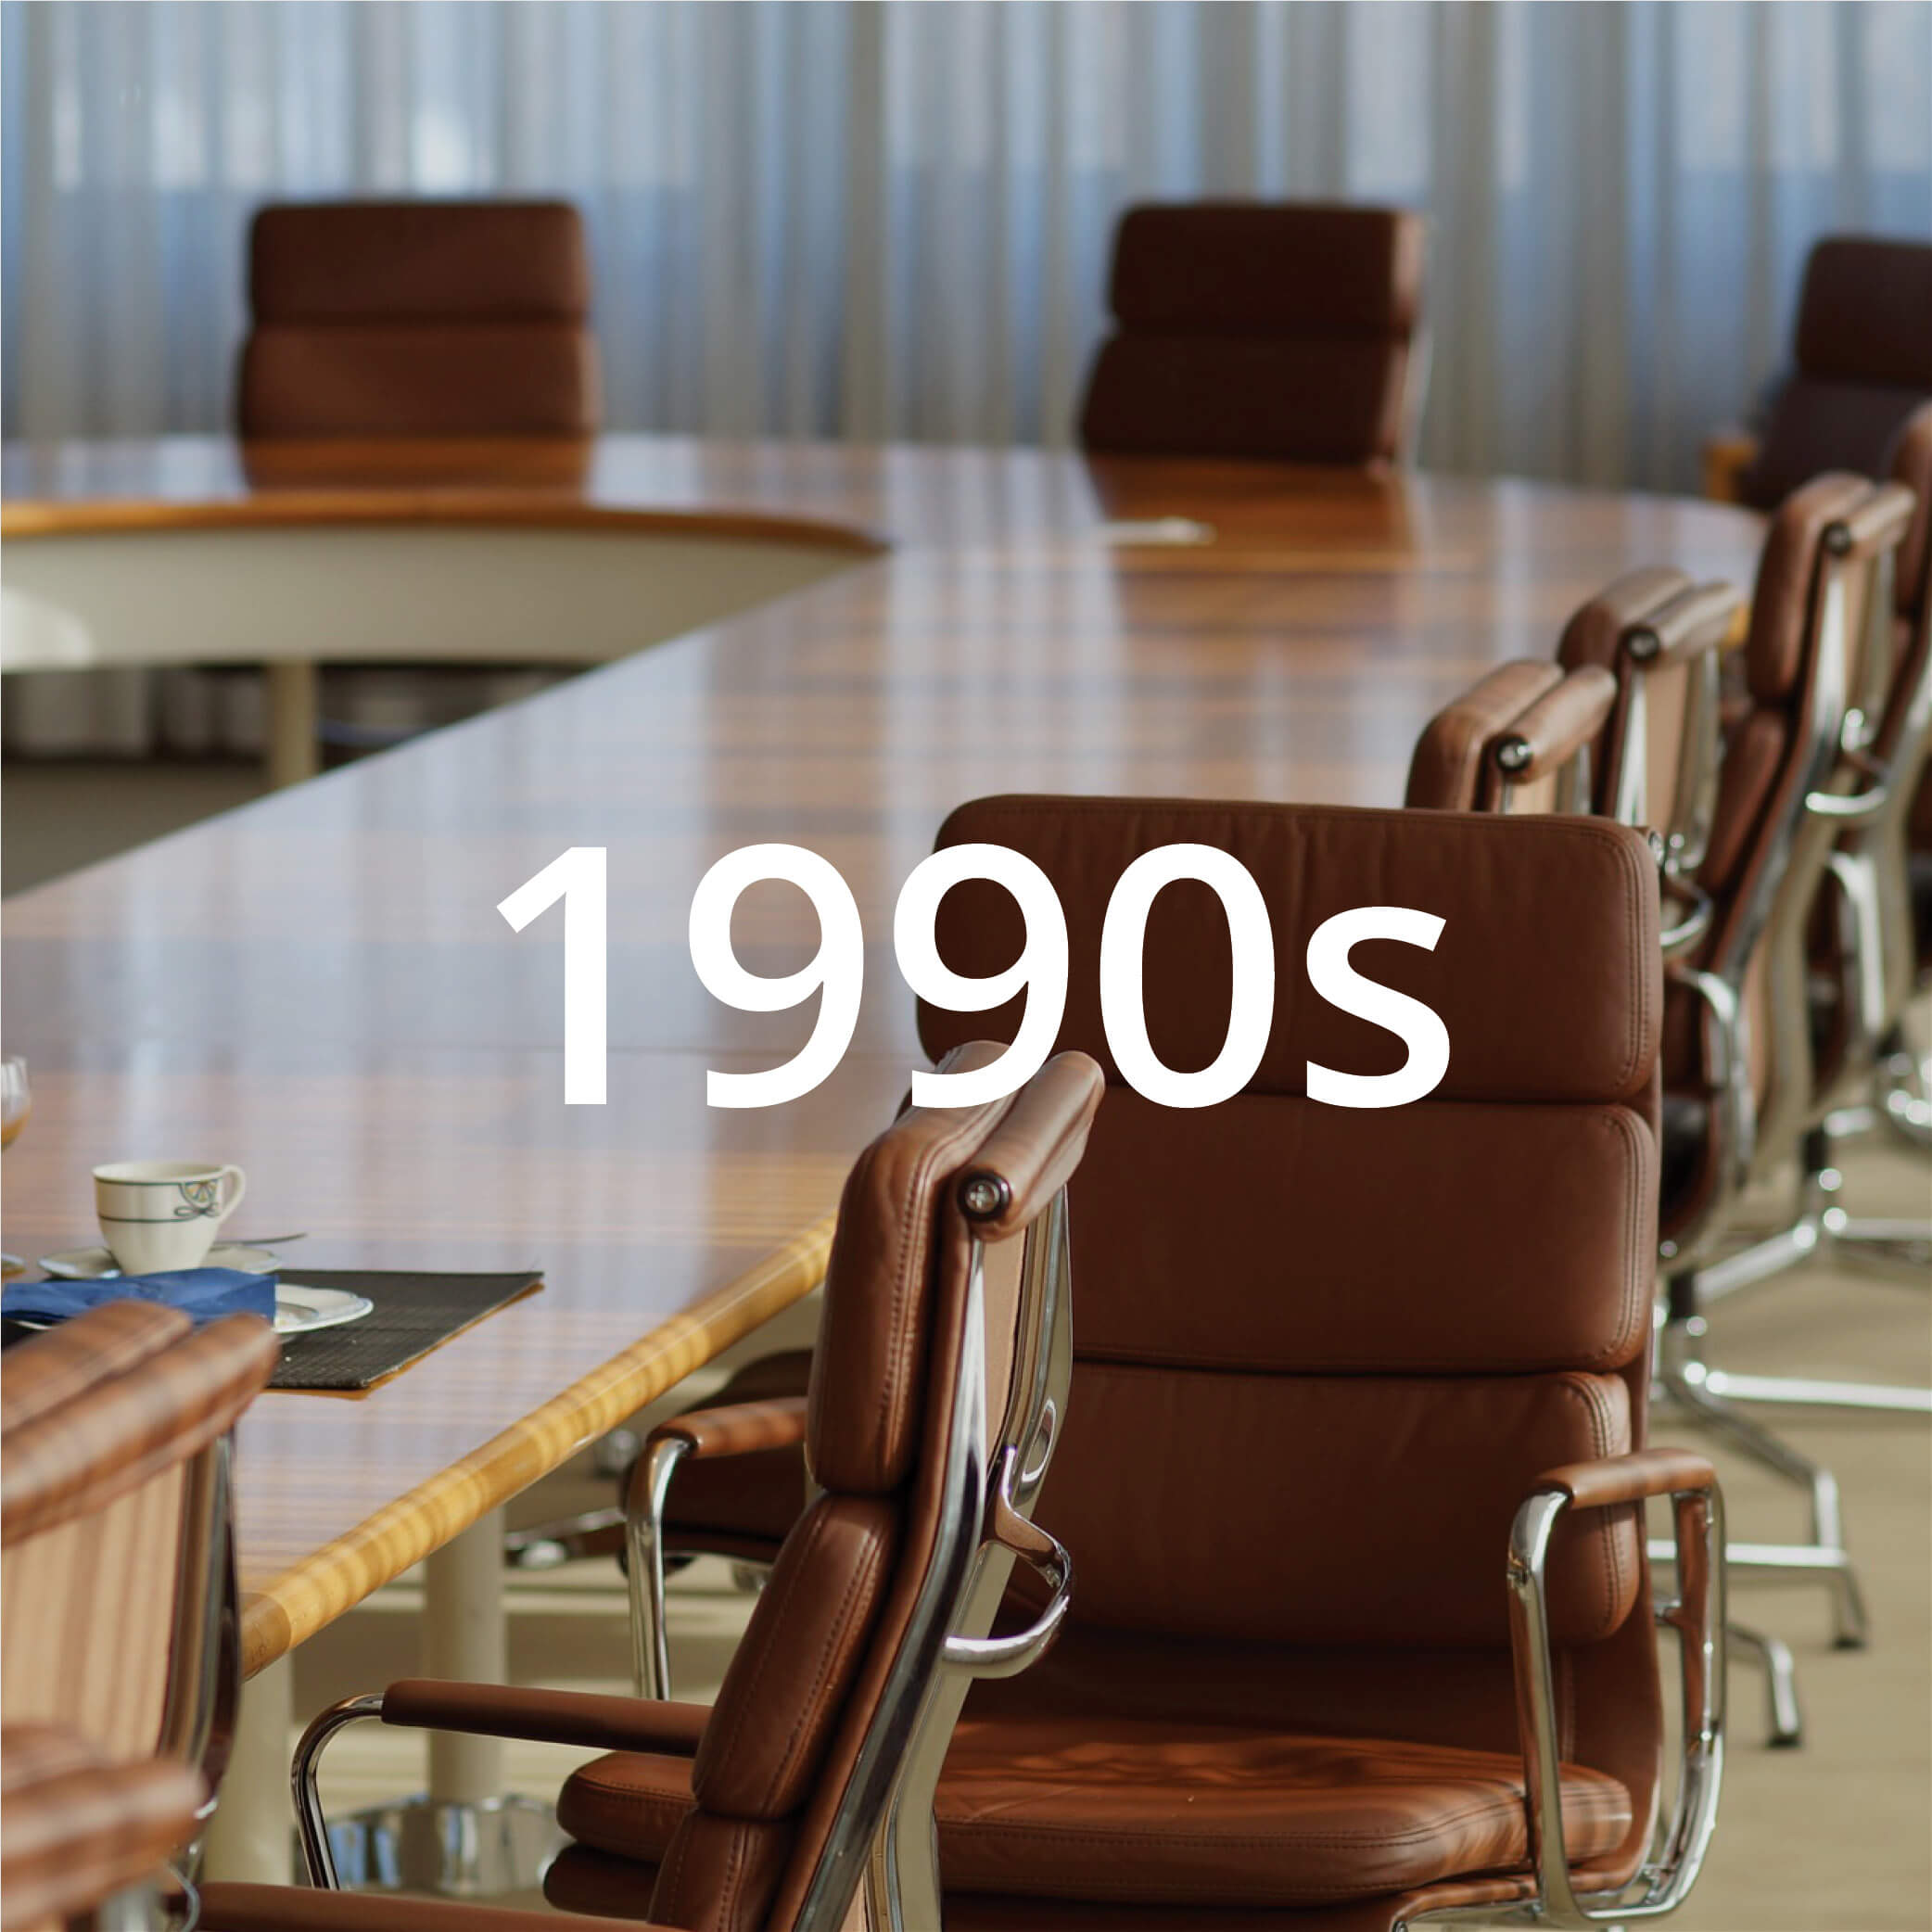 Photo of a meeting room featuring a u-shaped table and modern brown leather chairs. Photo also features text overlay that reads "1990s".